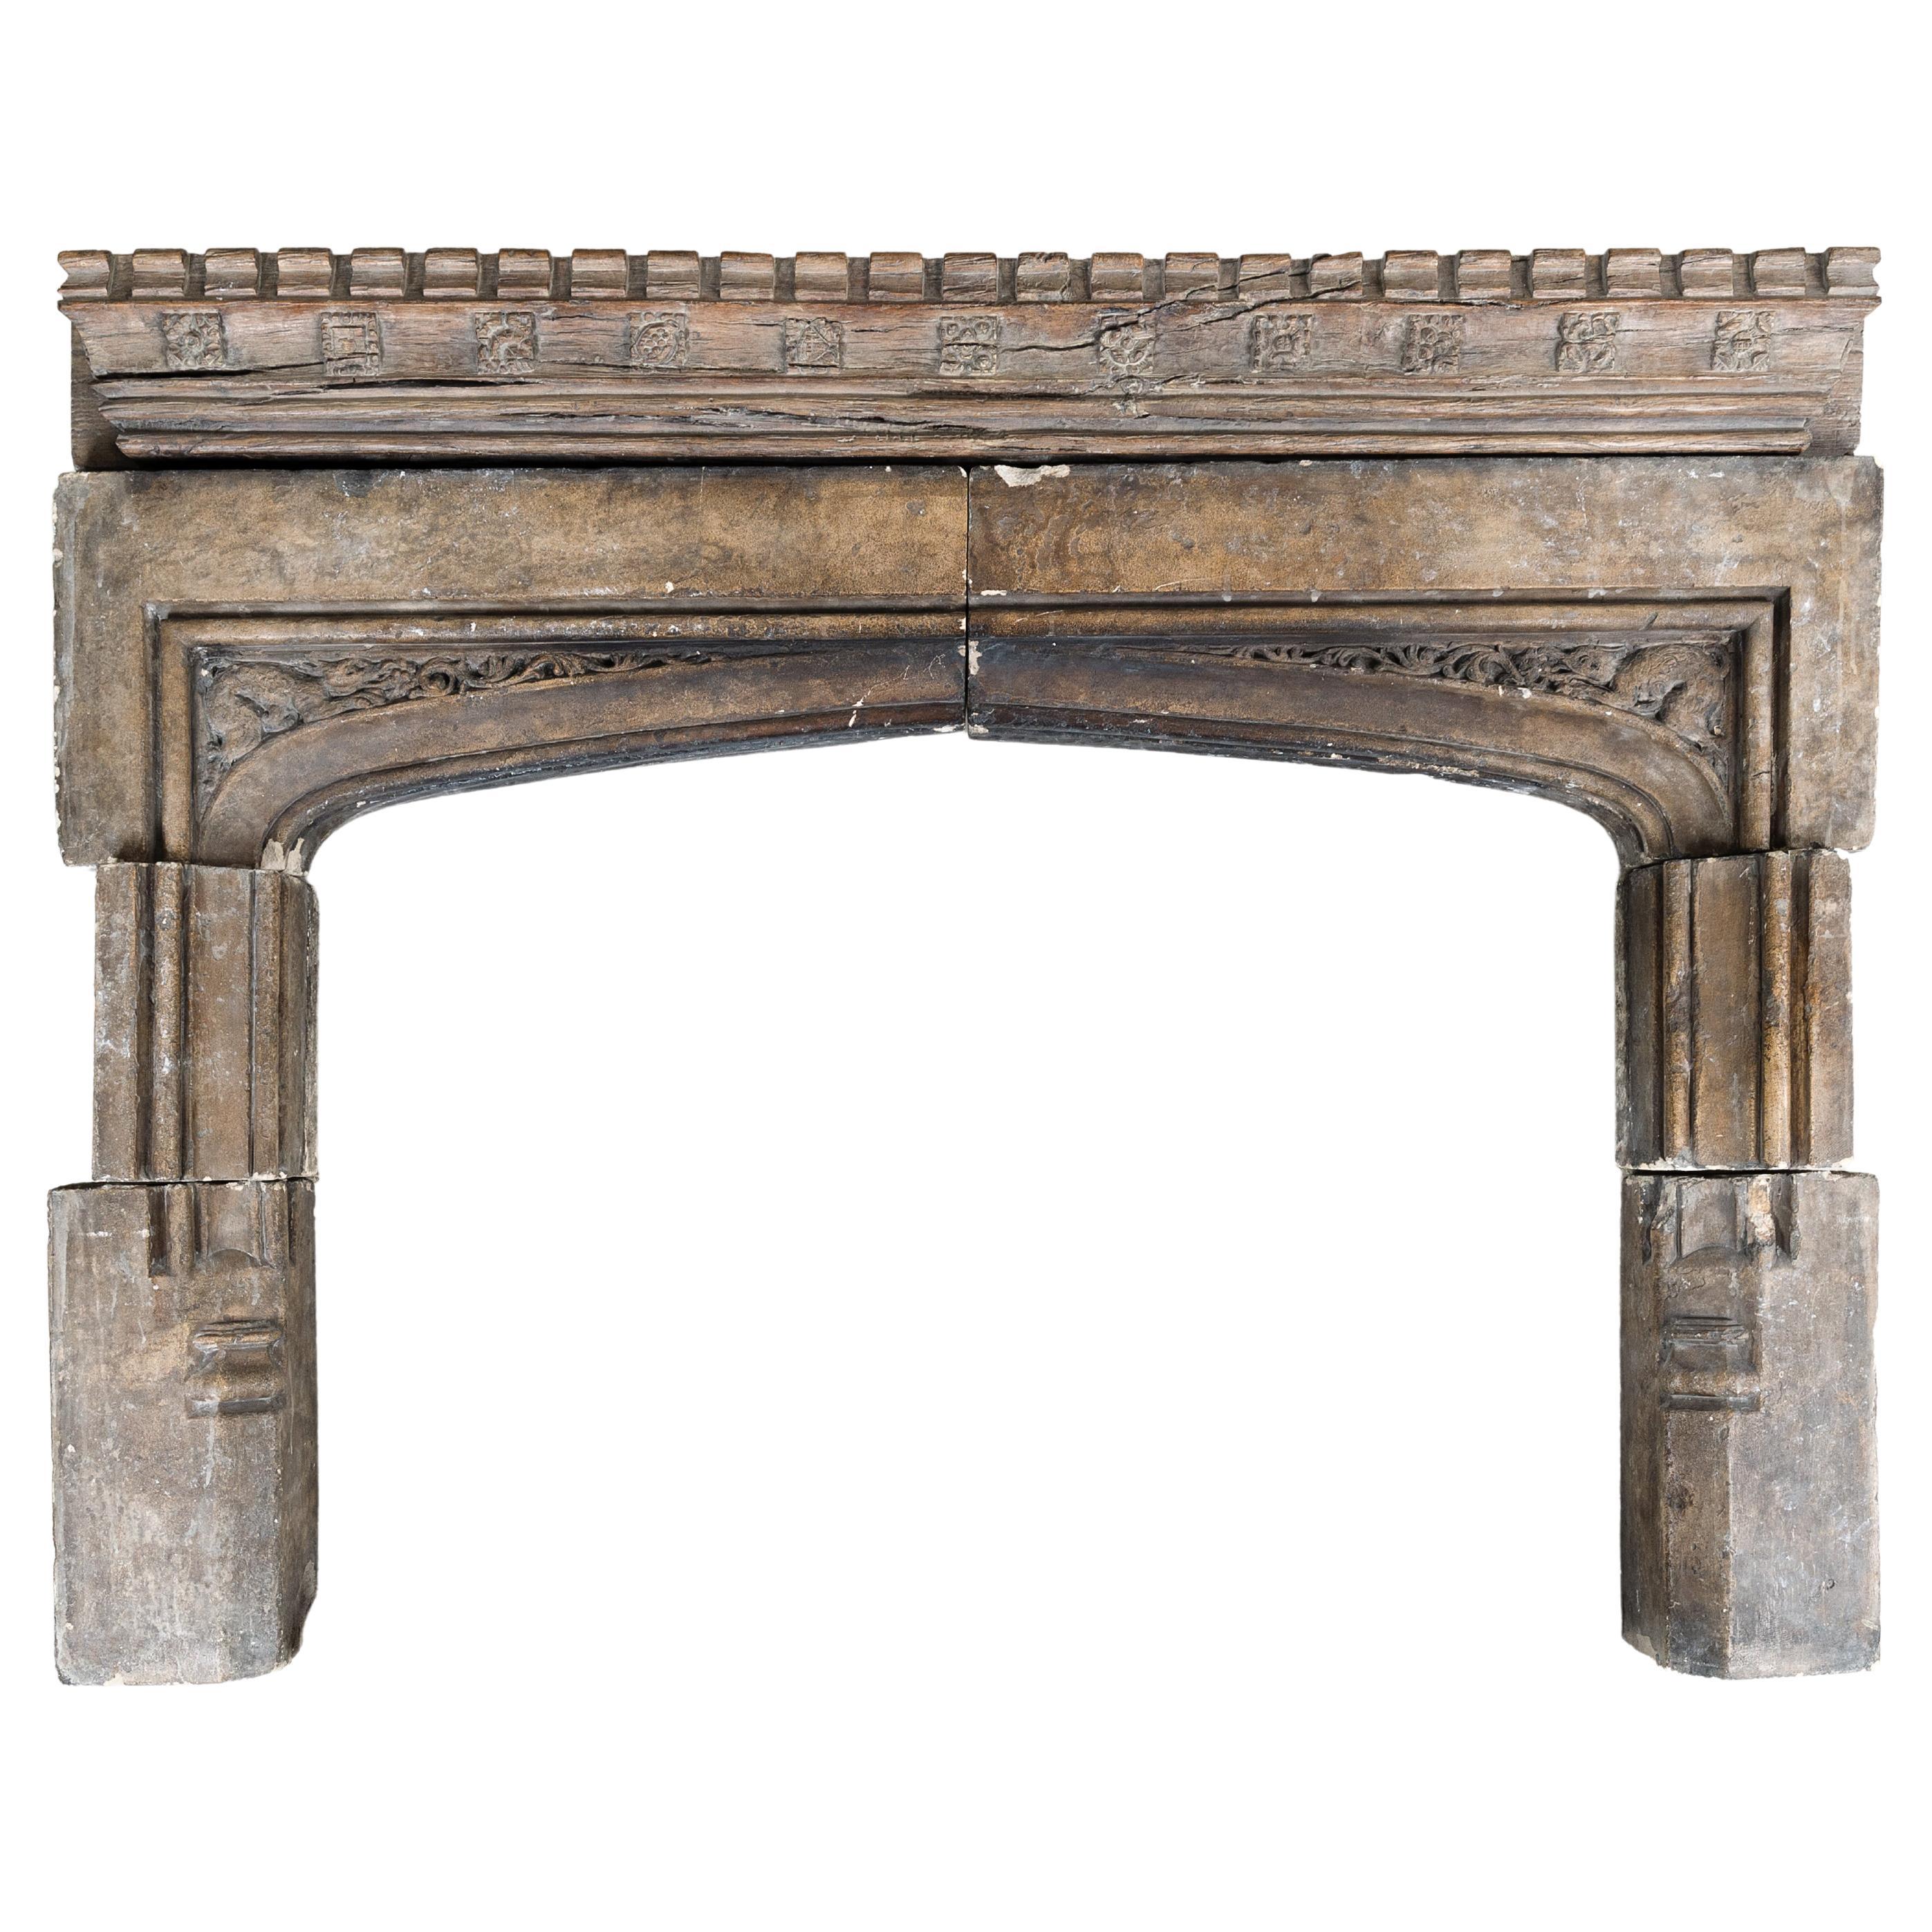 Tudor Arched Stone Recessed Fireplace at 1stDibs